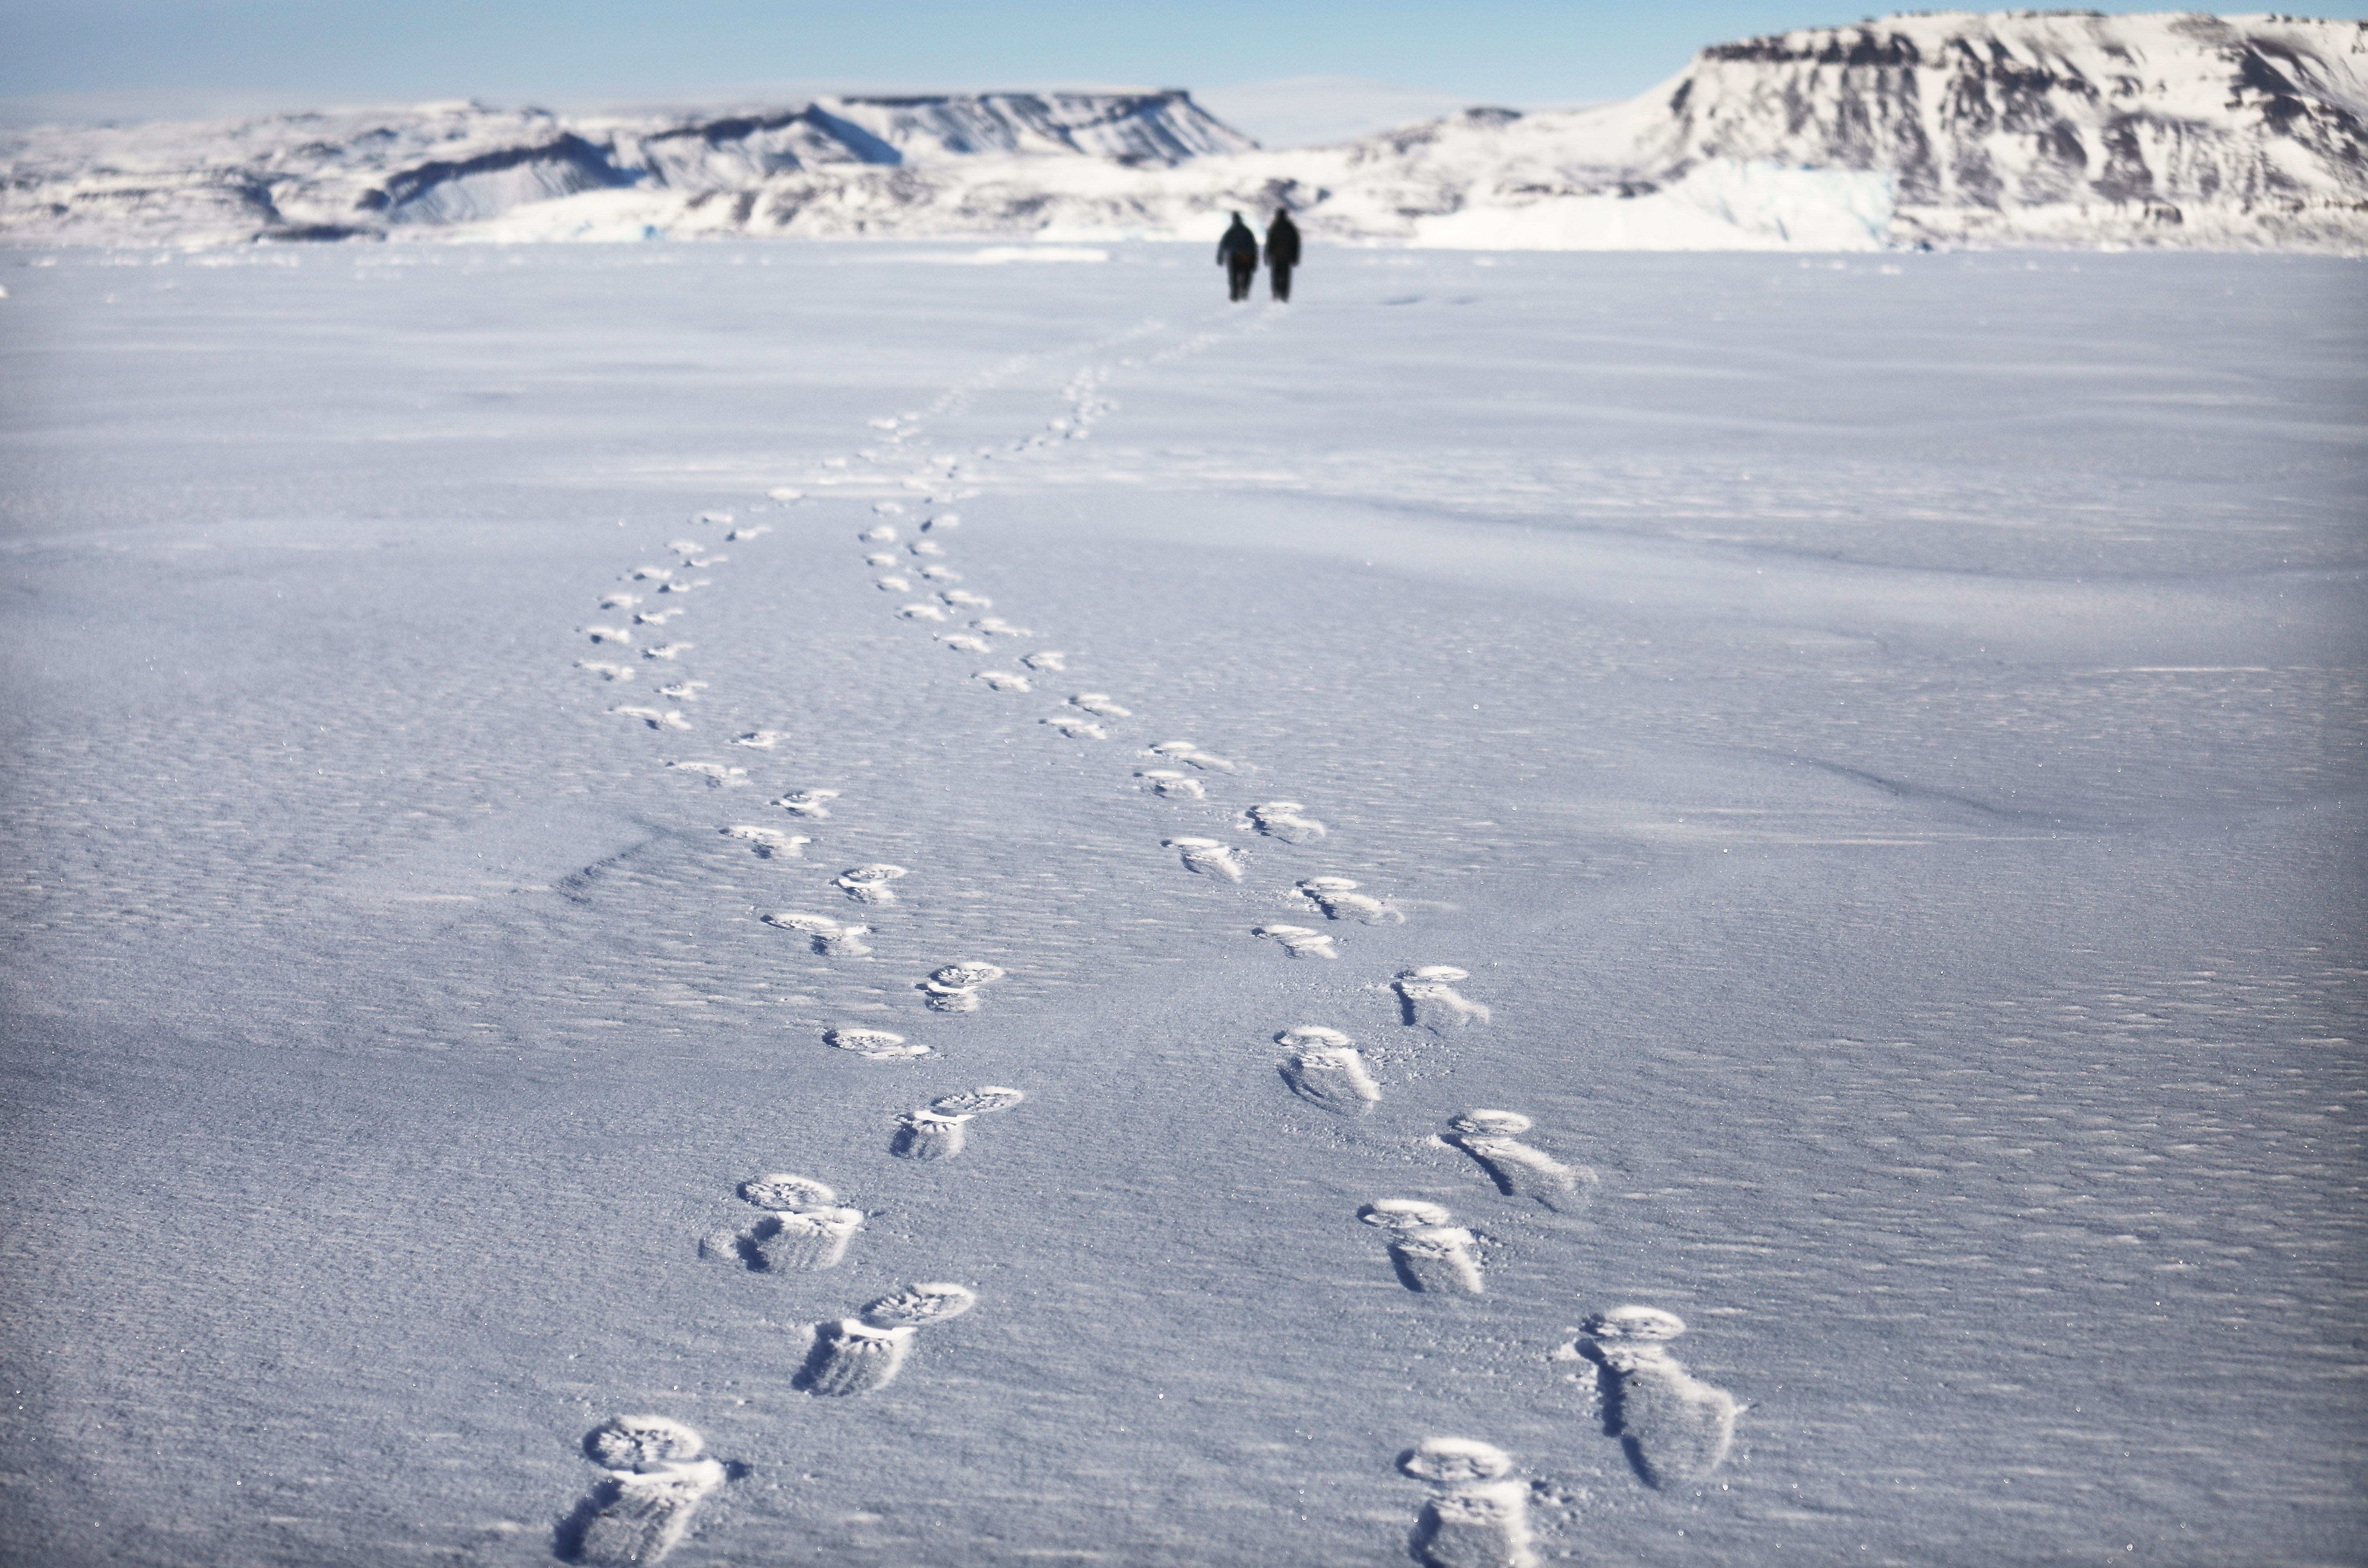 Project scientist Nathan Kurtz and senior support scientist Jeremy Harbeck walk on their way to survey an iceberg locked in sea ice near Thule Air Base on March 26, 2017, in Pituffik, Greenland. NASA's Operation IceBridge was flying research missions out of the base and other Arctic locations. IceBridge team members took the rare opportunity to survey sea ice near the base from the ground. Thule Air Base is the U.S. military's northernmost base located some 750 miles above the Arctic Circle. (Mario Tama/Getty Images)